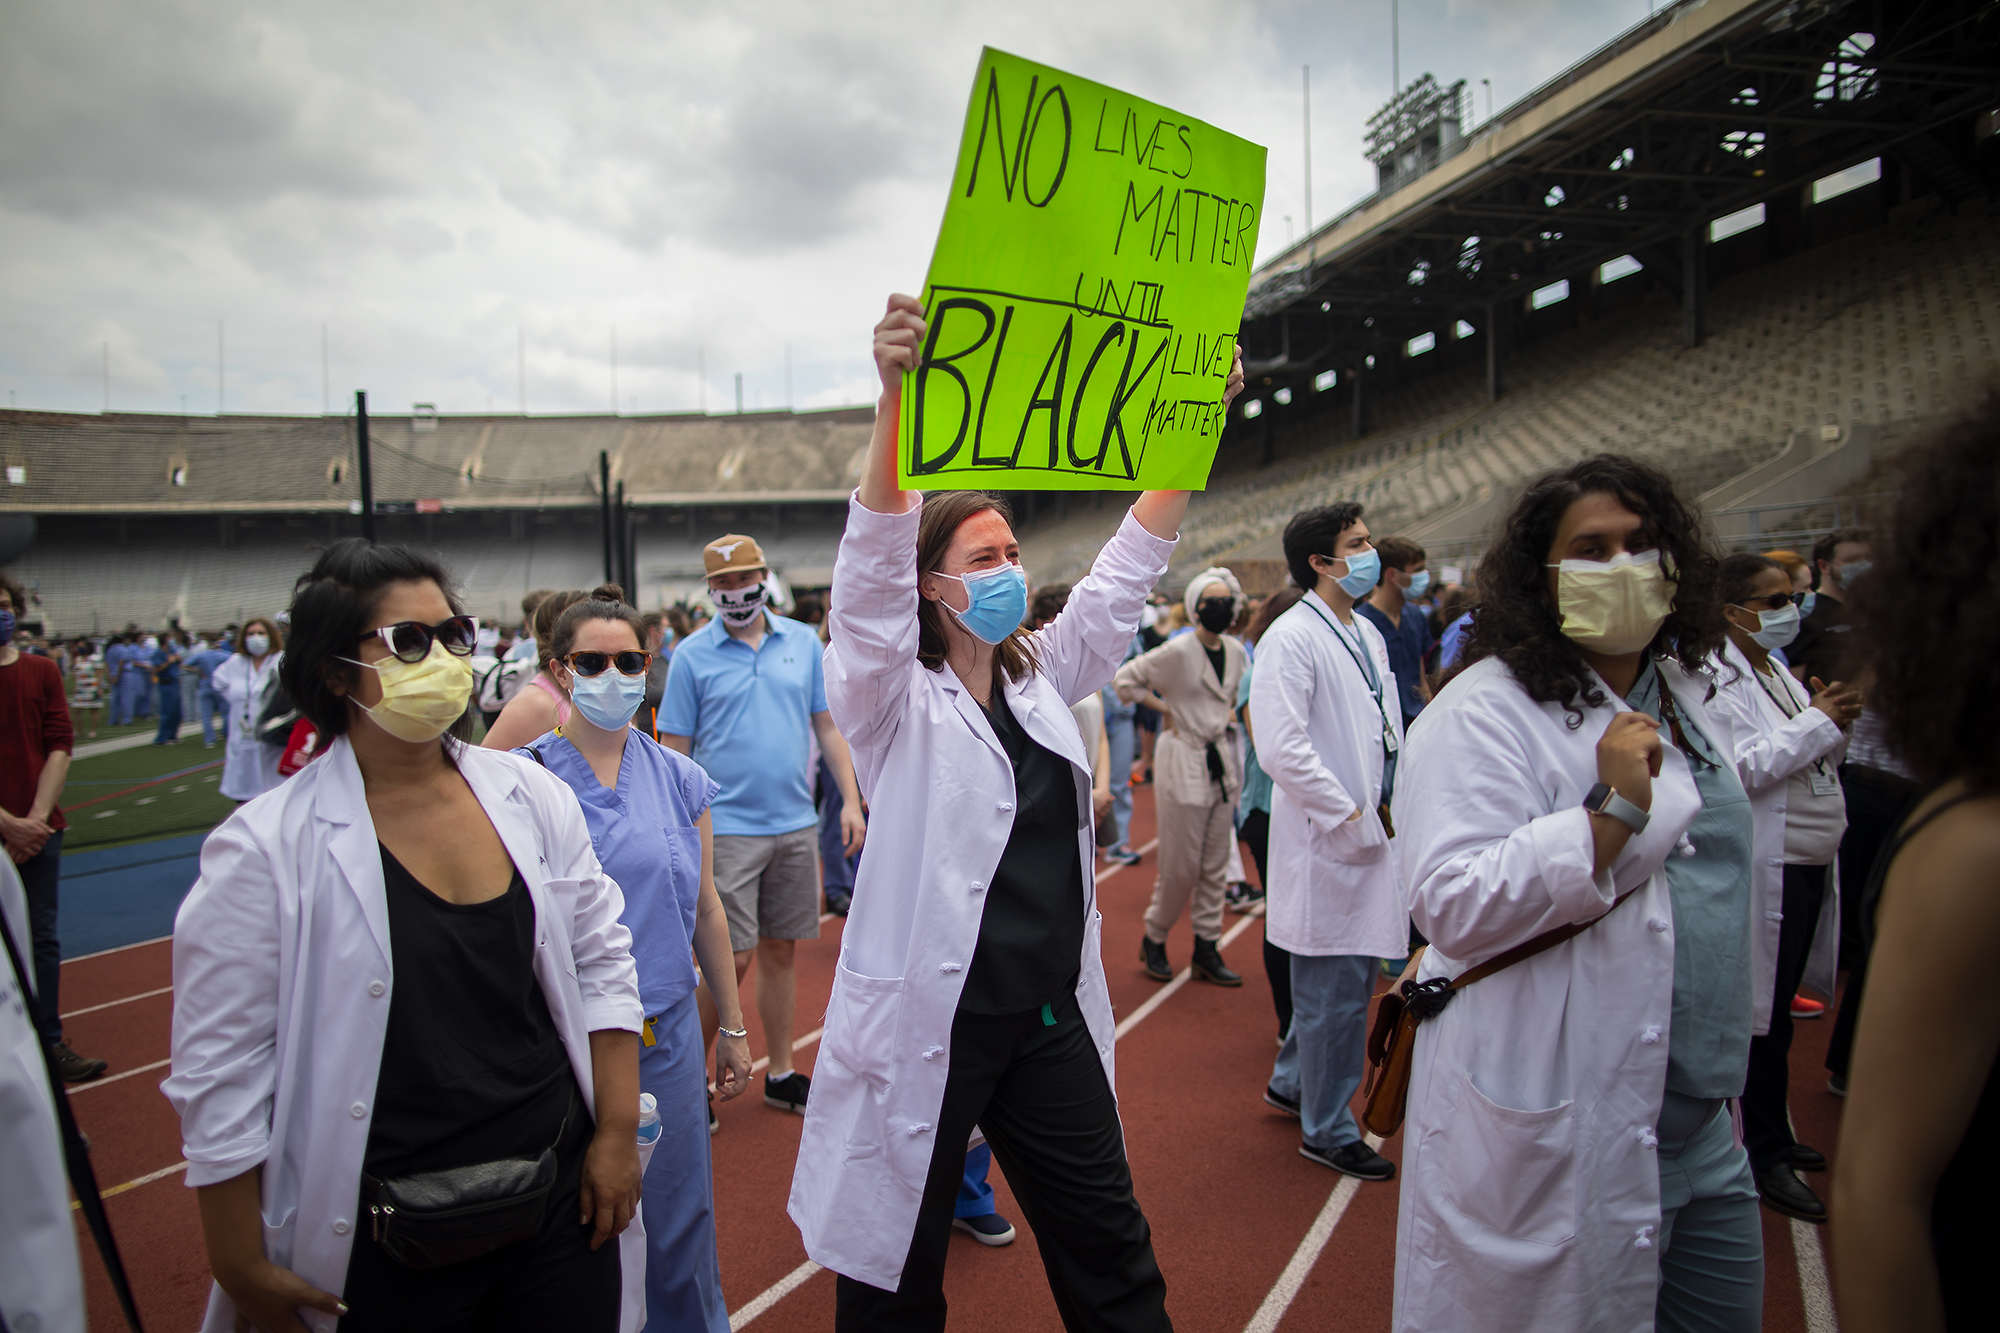 Penn Medicine workers in protective face masks stand on the track at Franklin Field, one holds a sign that reads NO Lives Matter until BLACK Lives Matter.